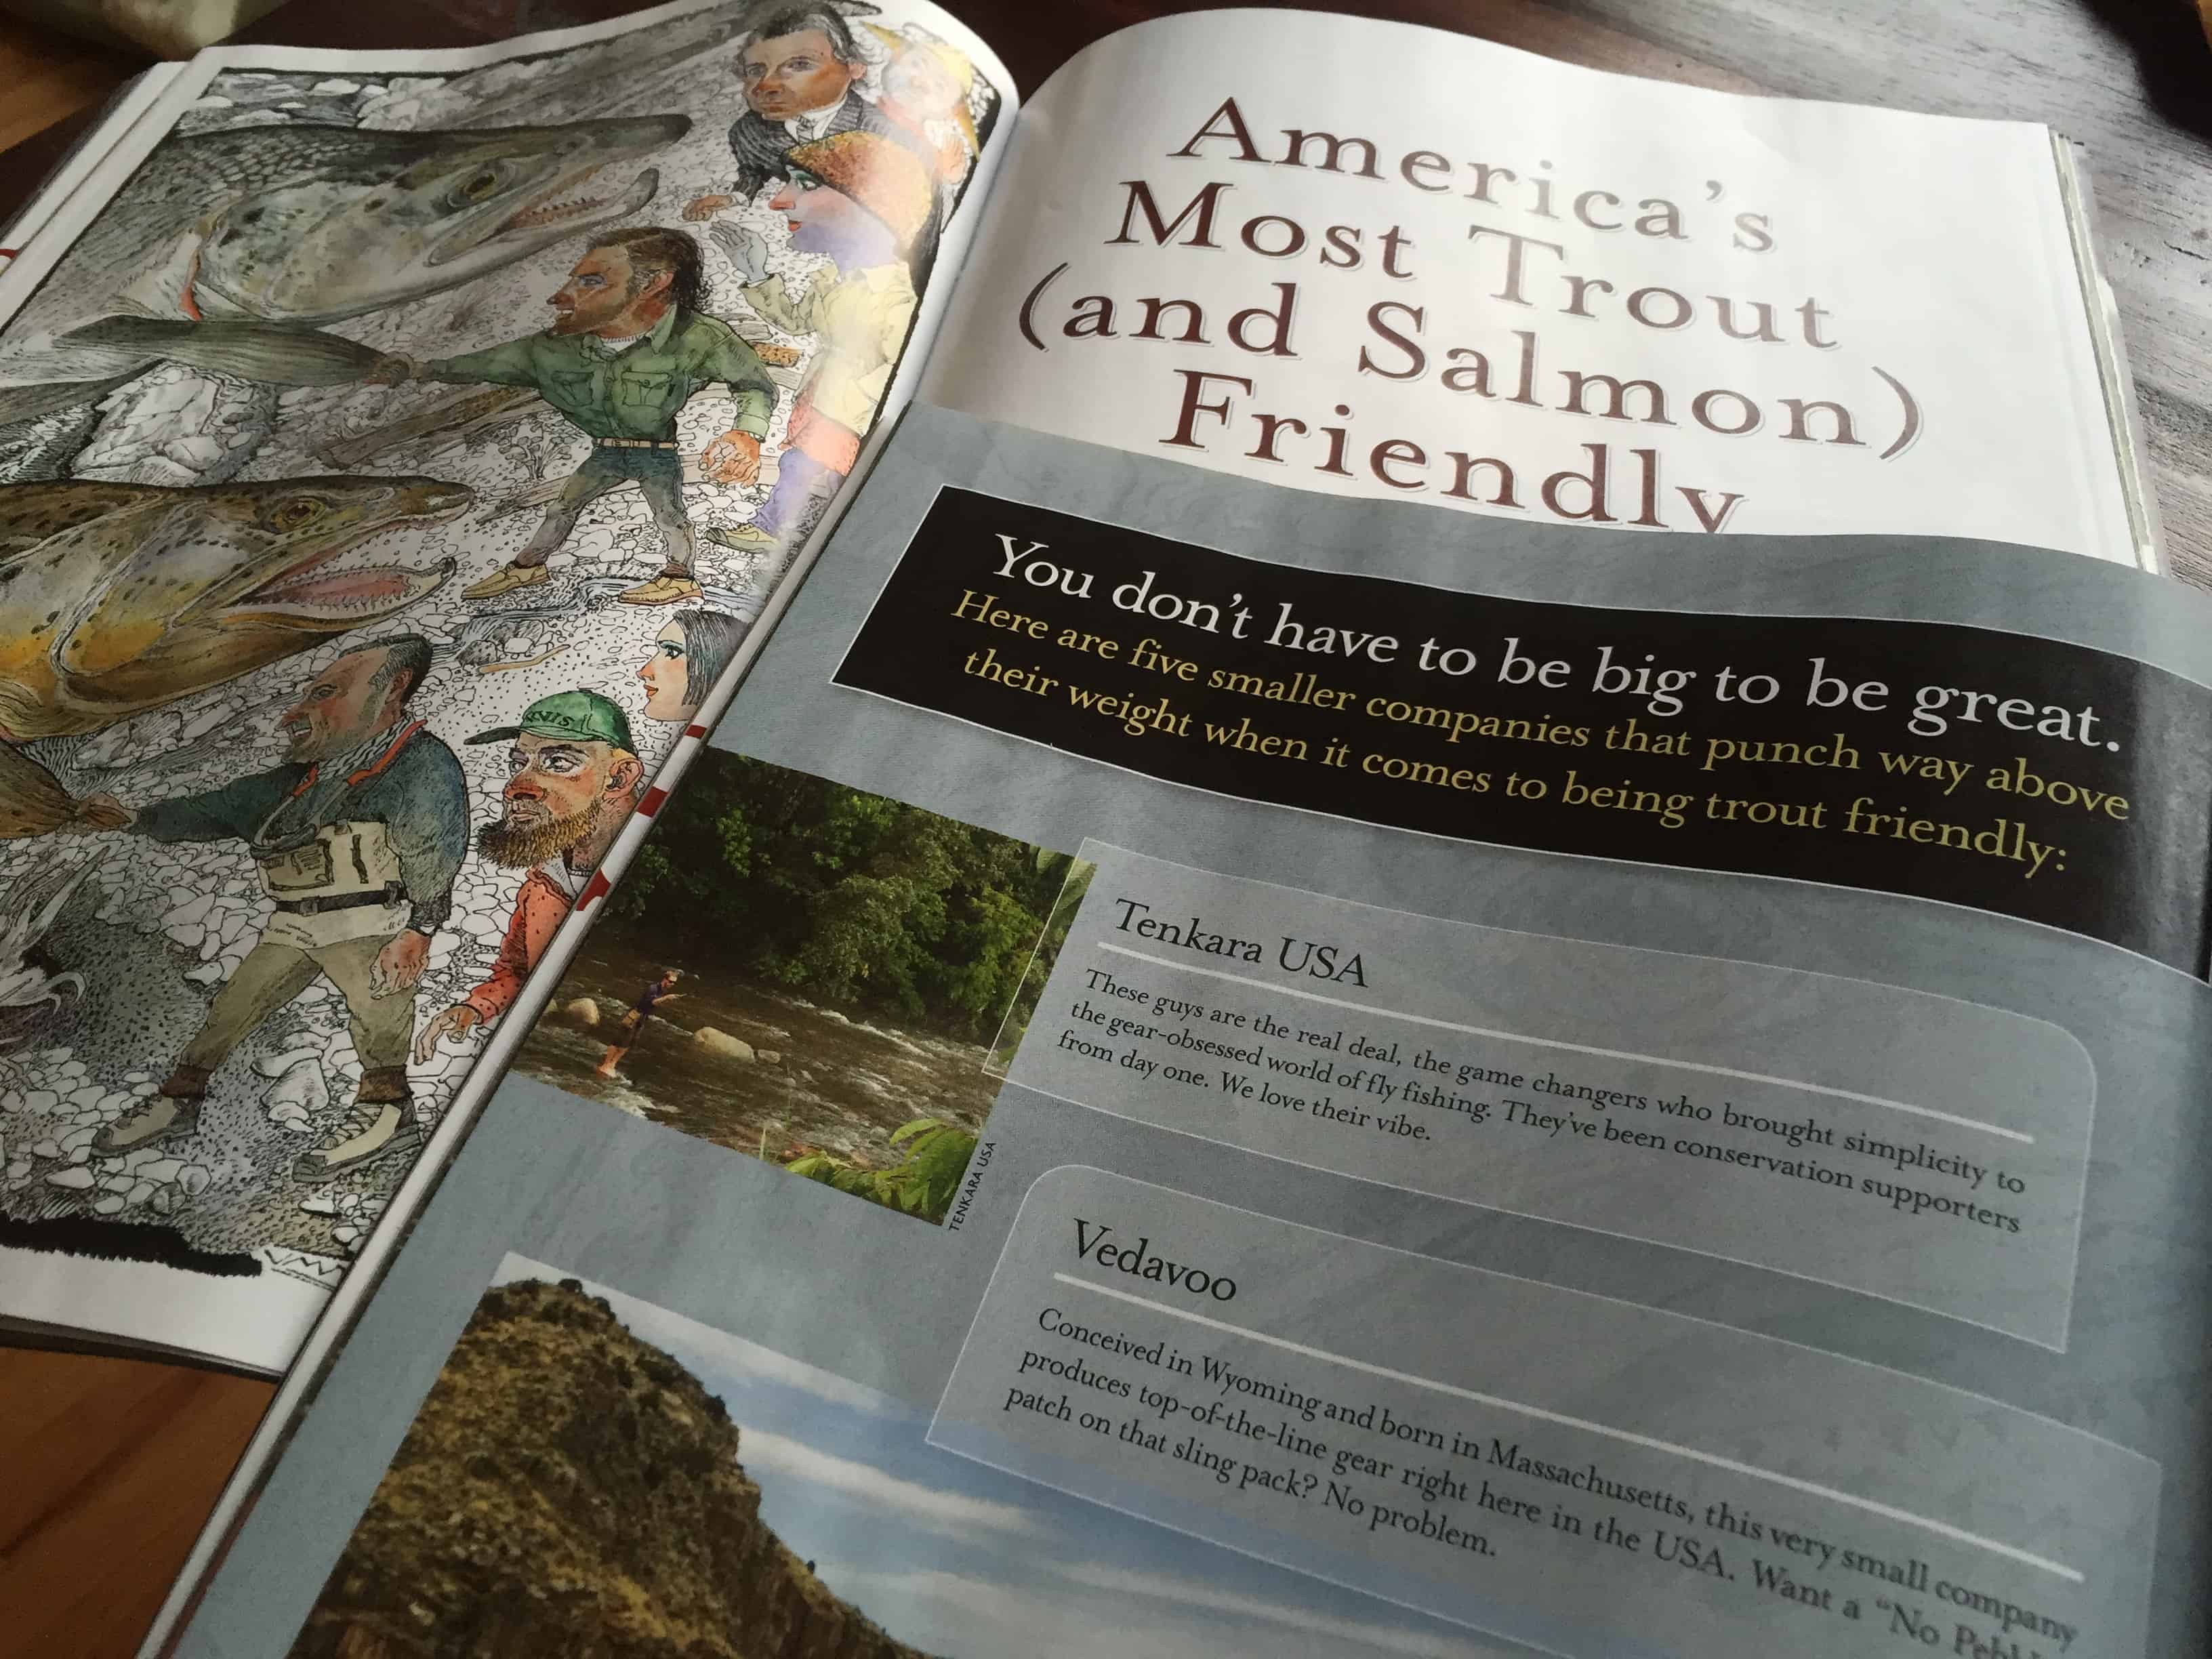 America's Most Trout Friendly Companies by Trout Unlimited